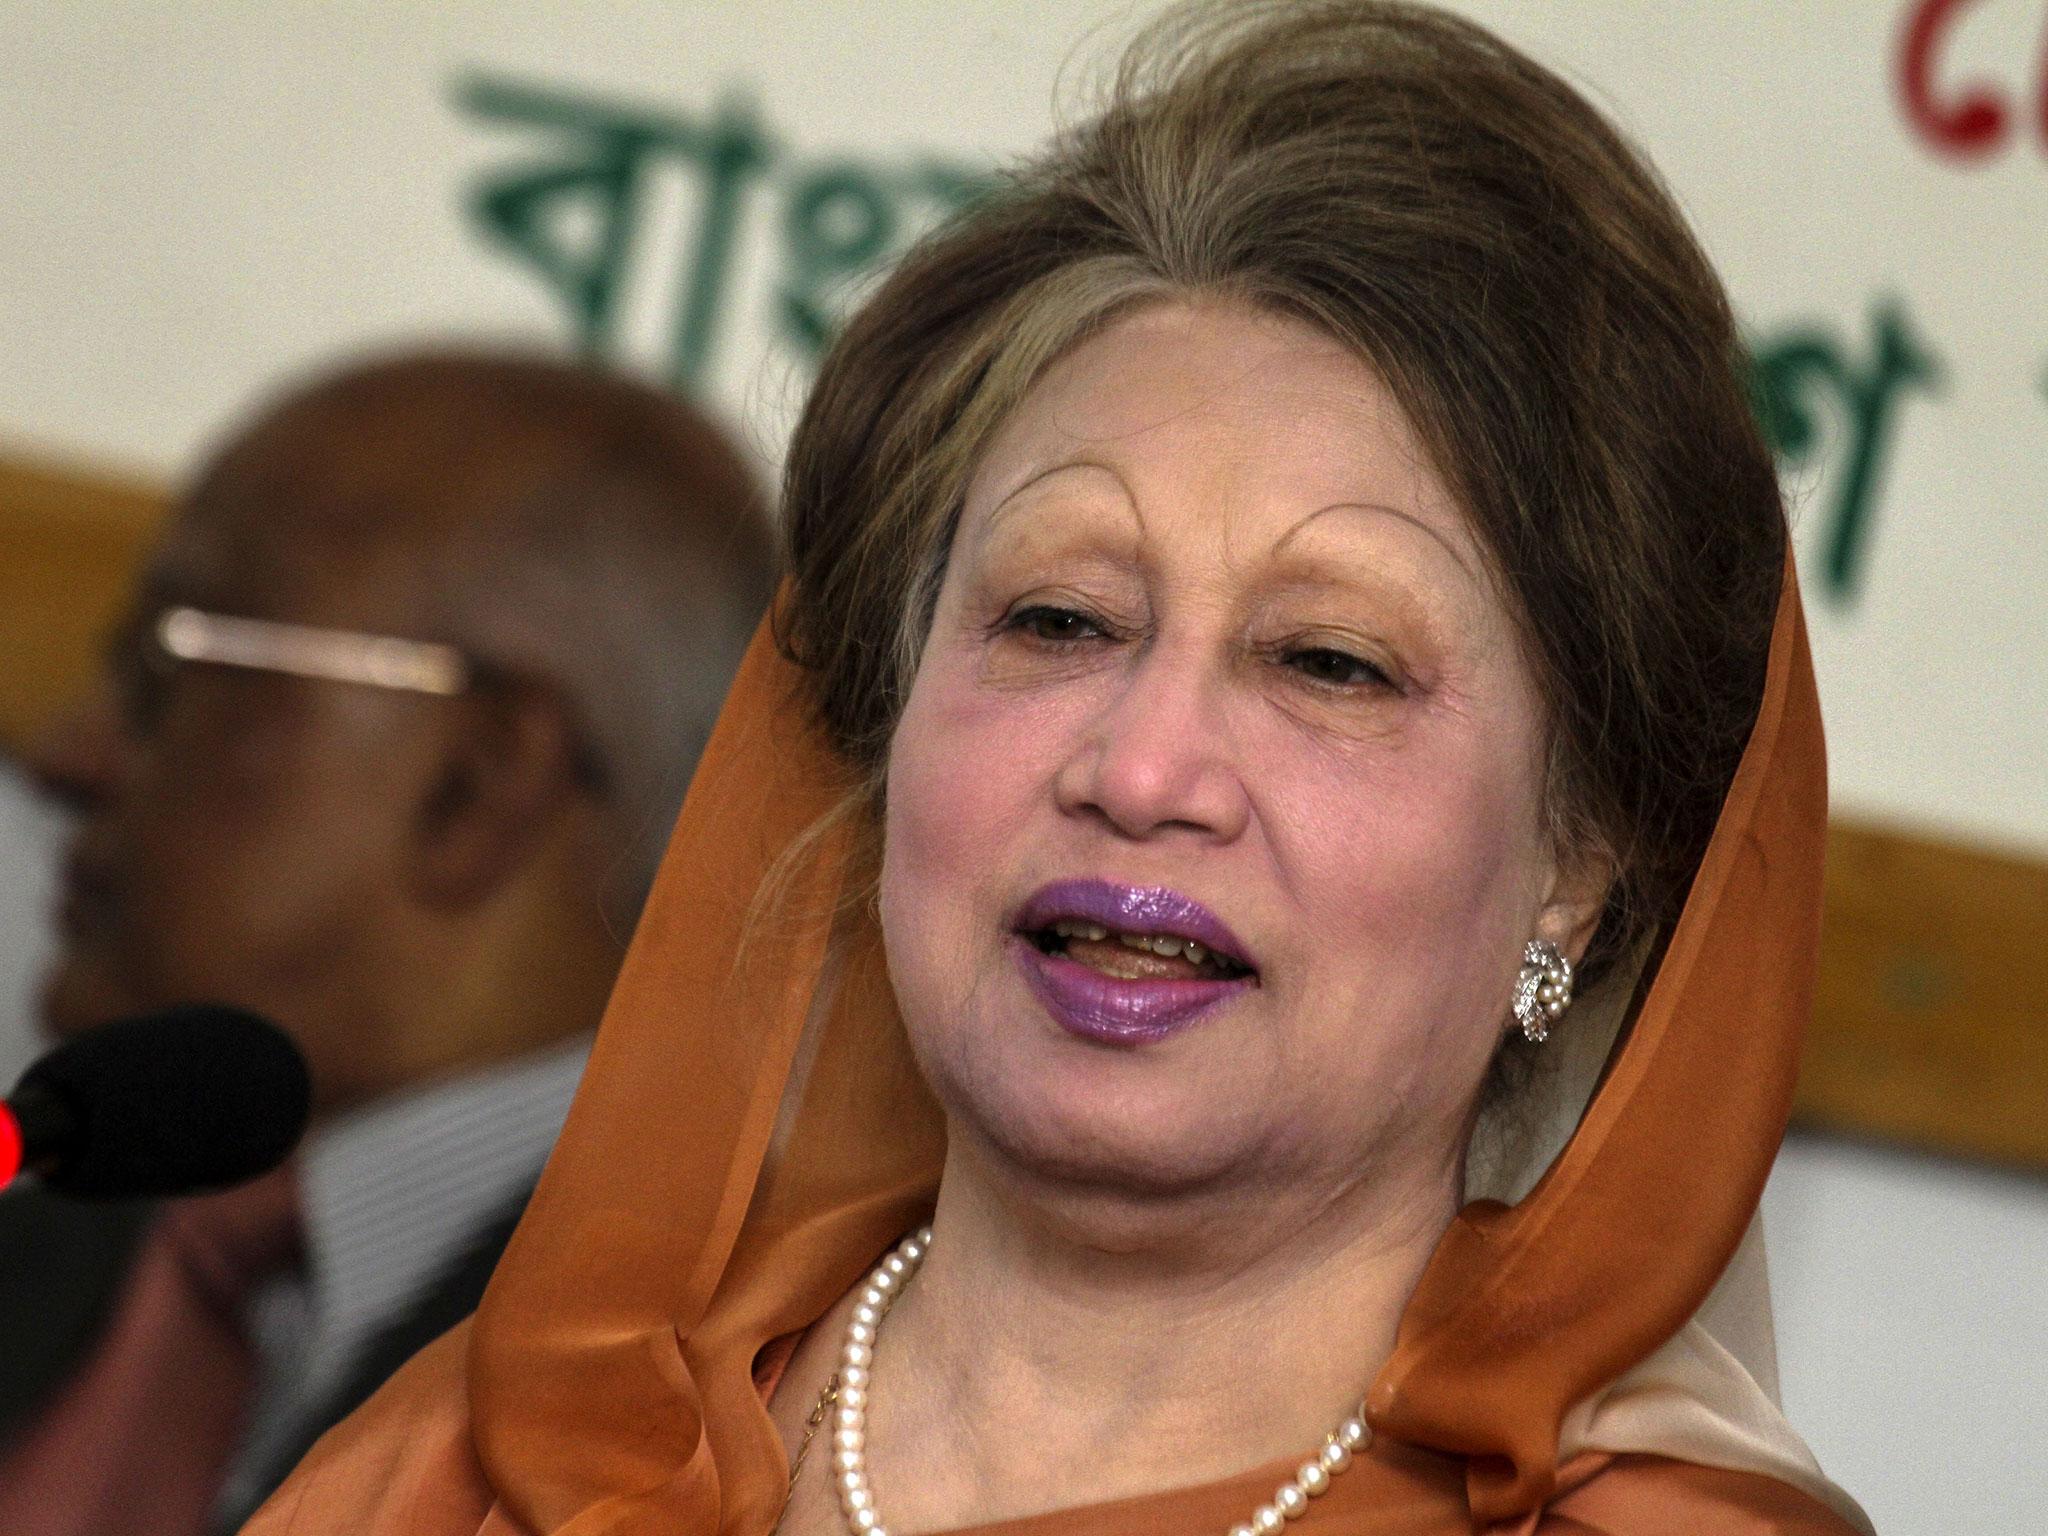 Khaleda Zia, who was Prime Minister of Bangladesh from 1991-1996, and again from 2001-2006, was convicted of embezzling money from donations meant for an orphanage trust